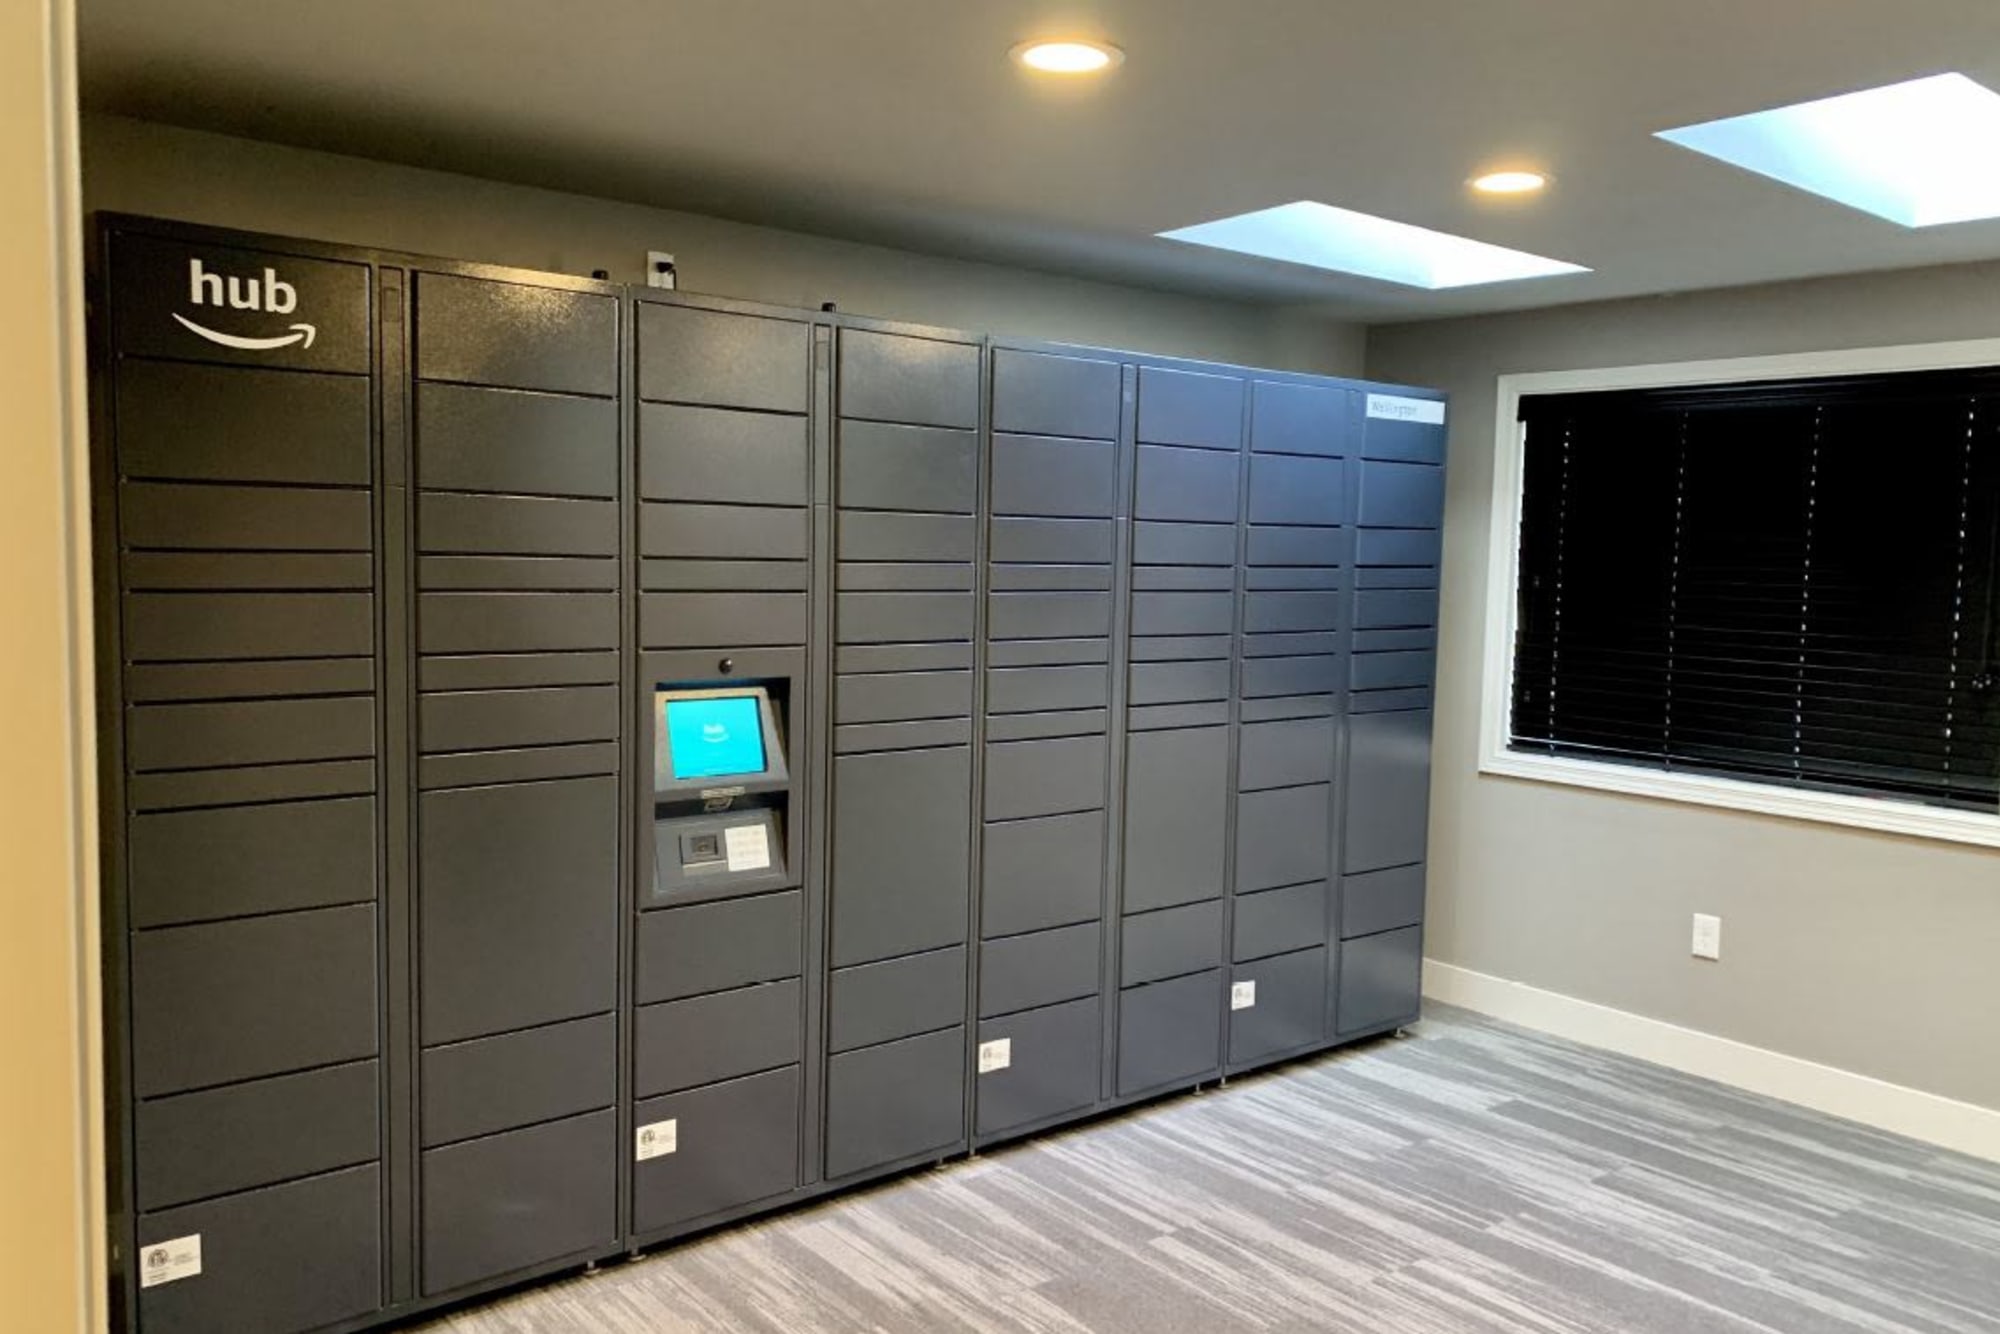 24 Hour Package Lockers with Amazon HUB at Wellington Apartment Homes in Silverdale, Washington